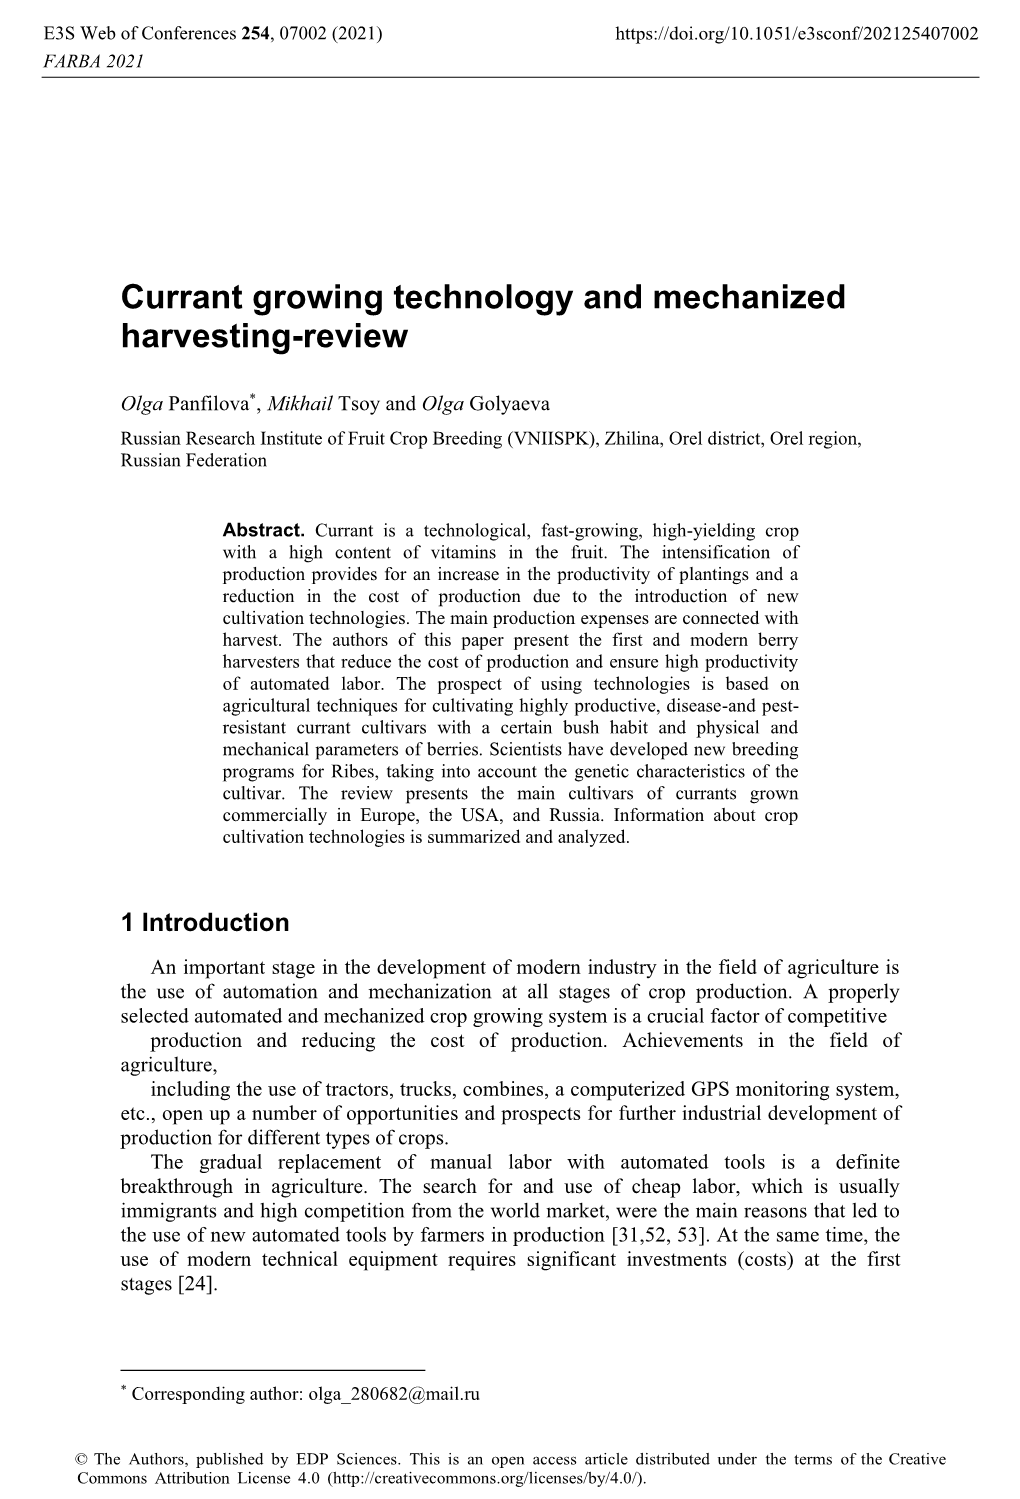 Currant Growing Technology and Mechanized Harvesting-Review